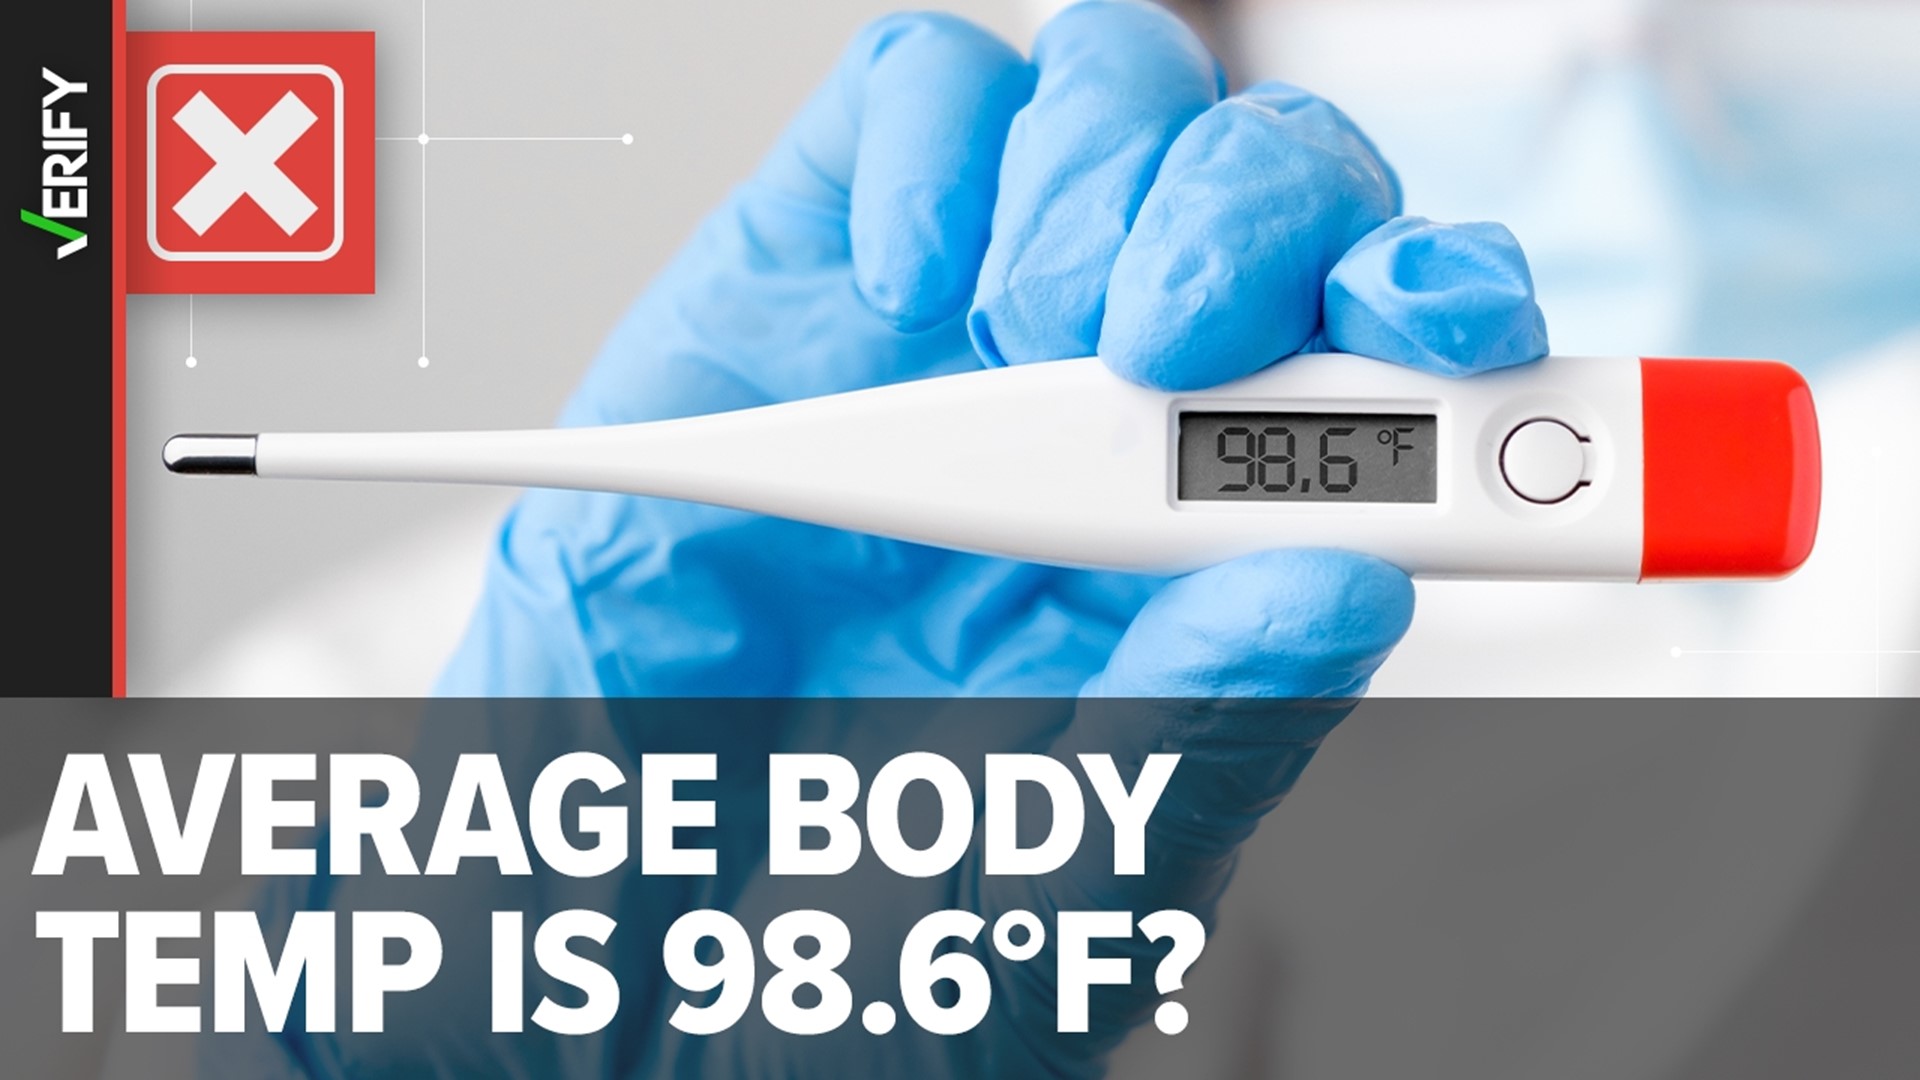 No, the average body temperature is not 98.6 degrees